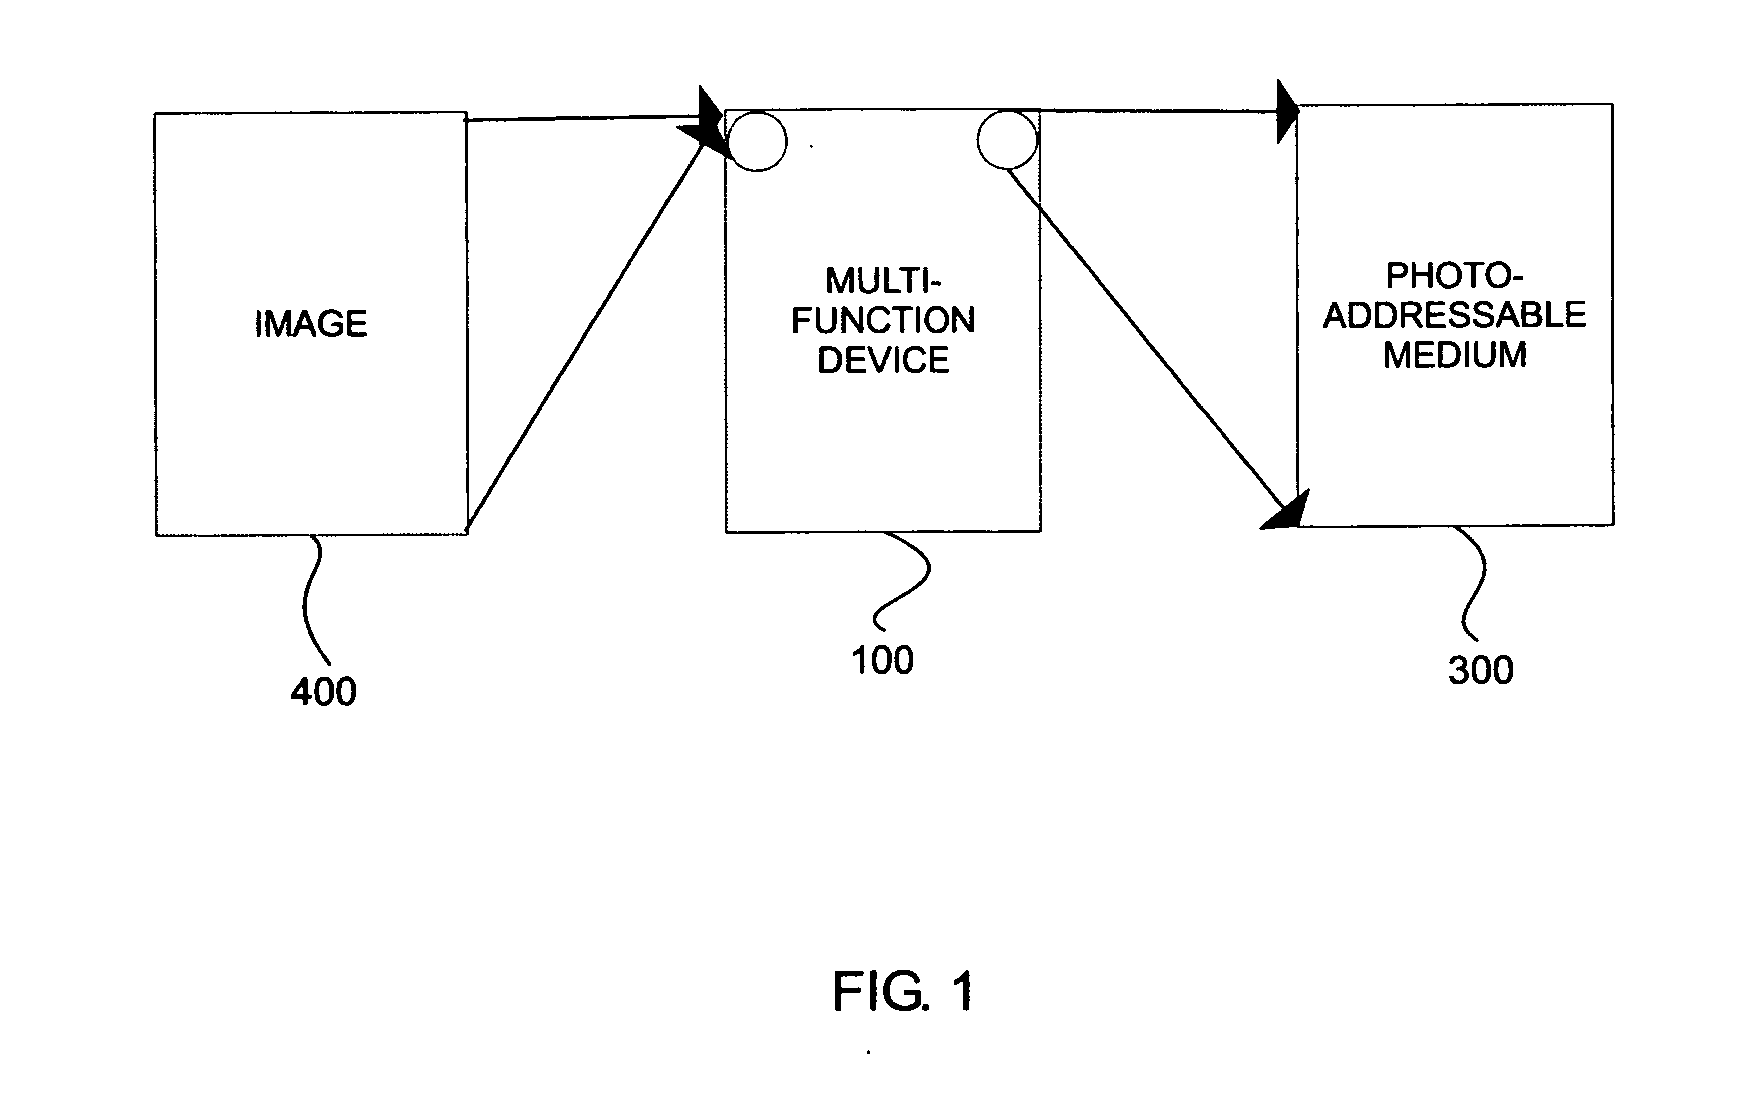 Multi-function image device